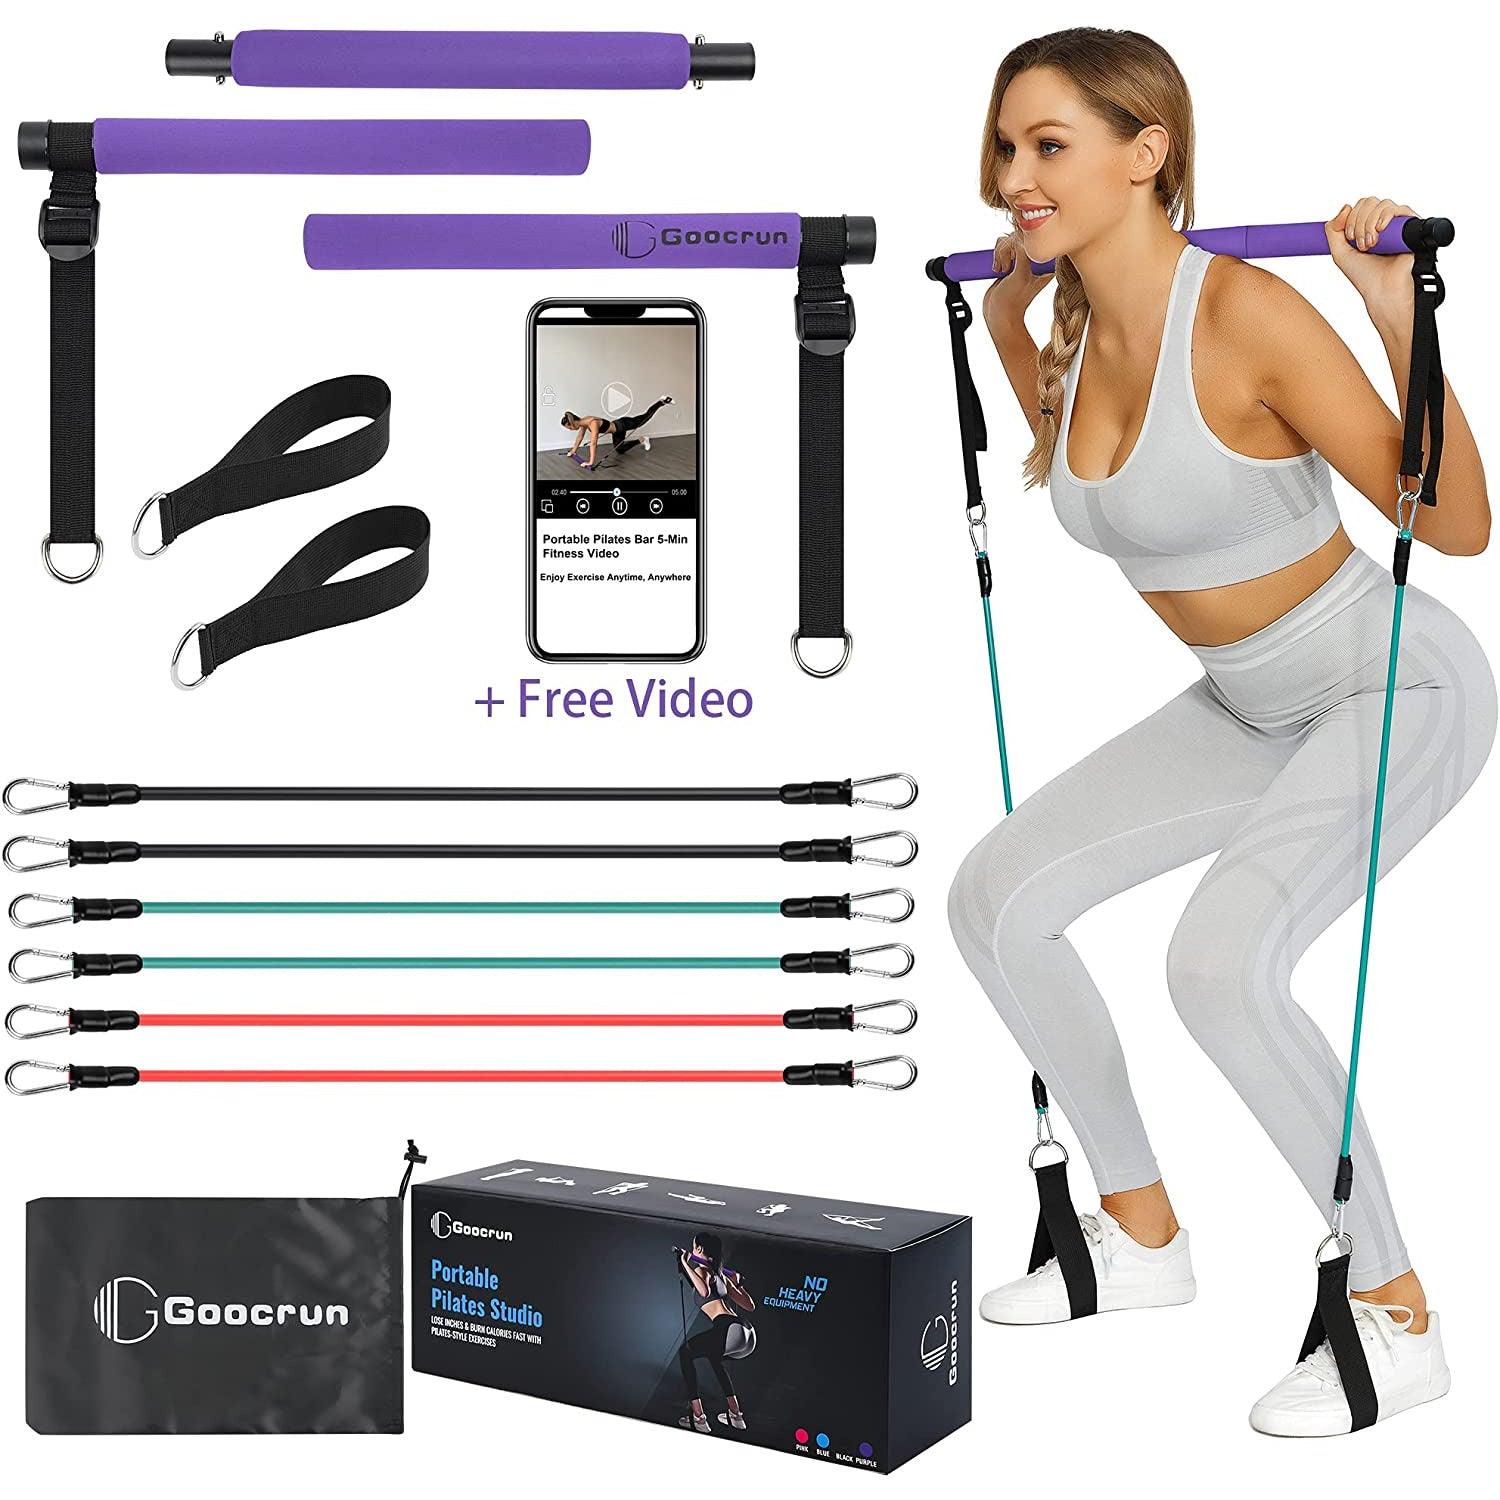 Pilates Bar Kit with Resistance Bands (30, 40 Lbs) - Portable 3 Section  Stick with Adjustable Length Bands - Multifunctional Fitness Equipment for